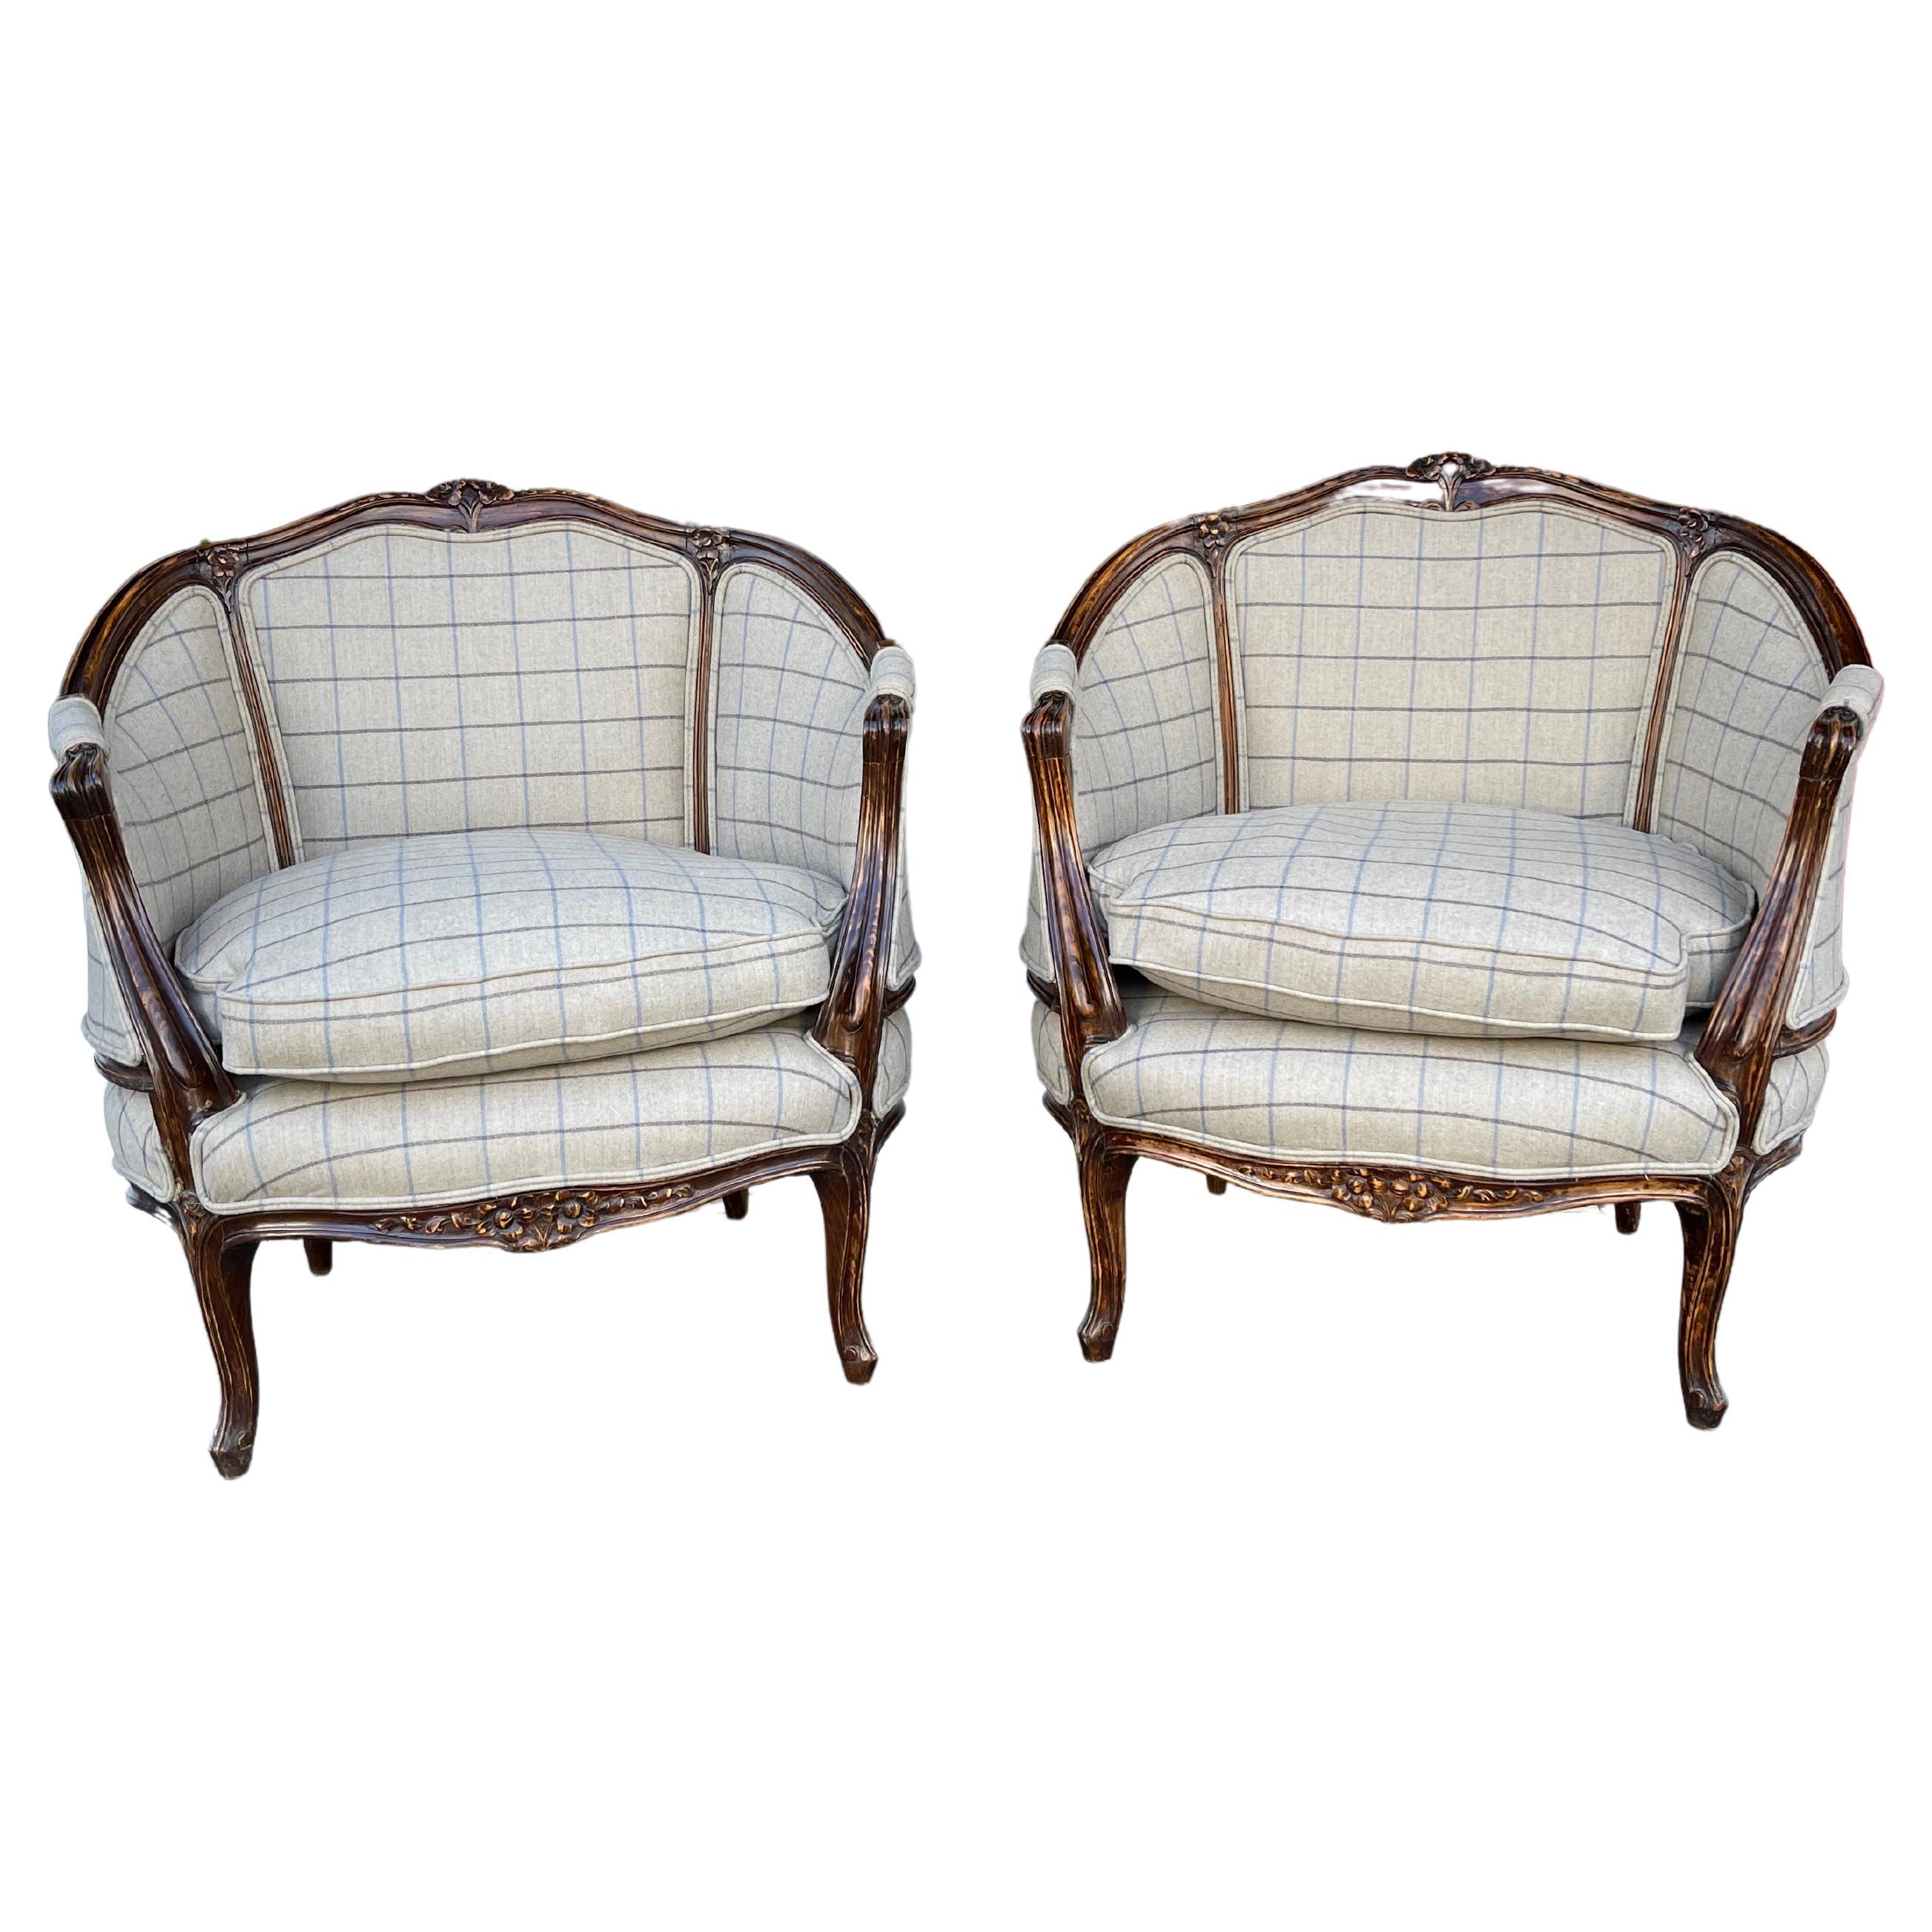 Pair of French Walnut Carved Armchairs in the Style of Louis XV, c.1890